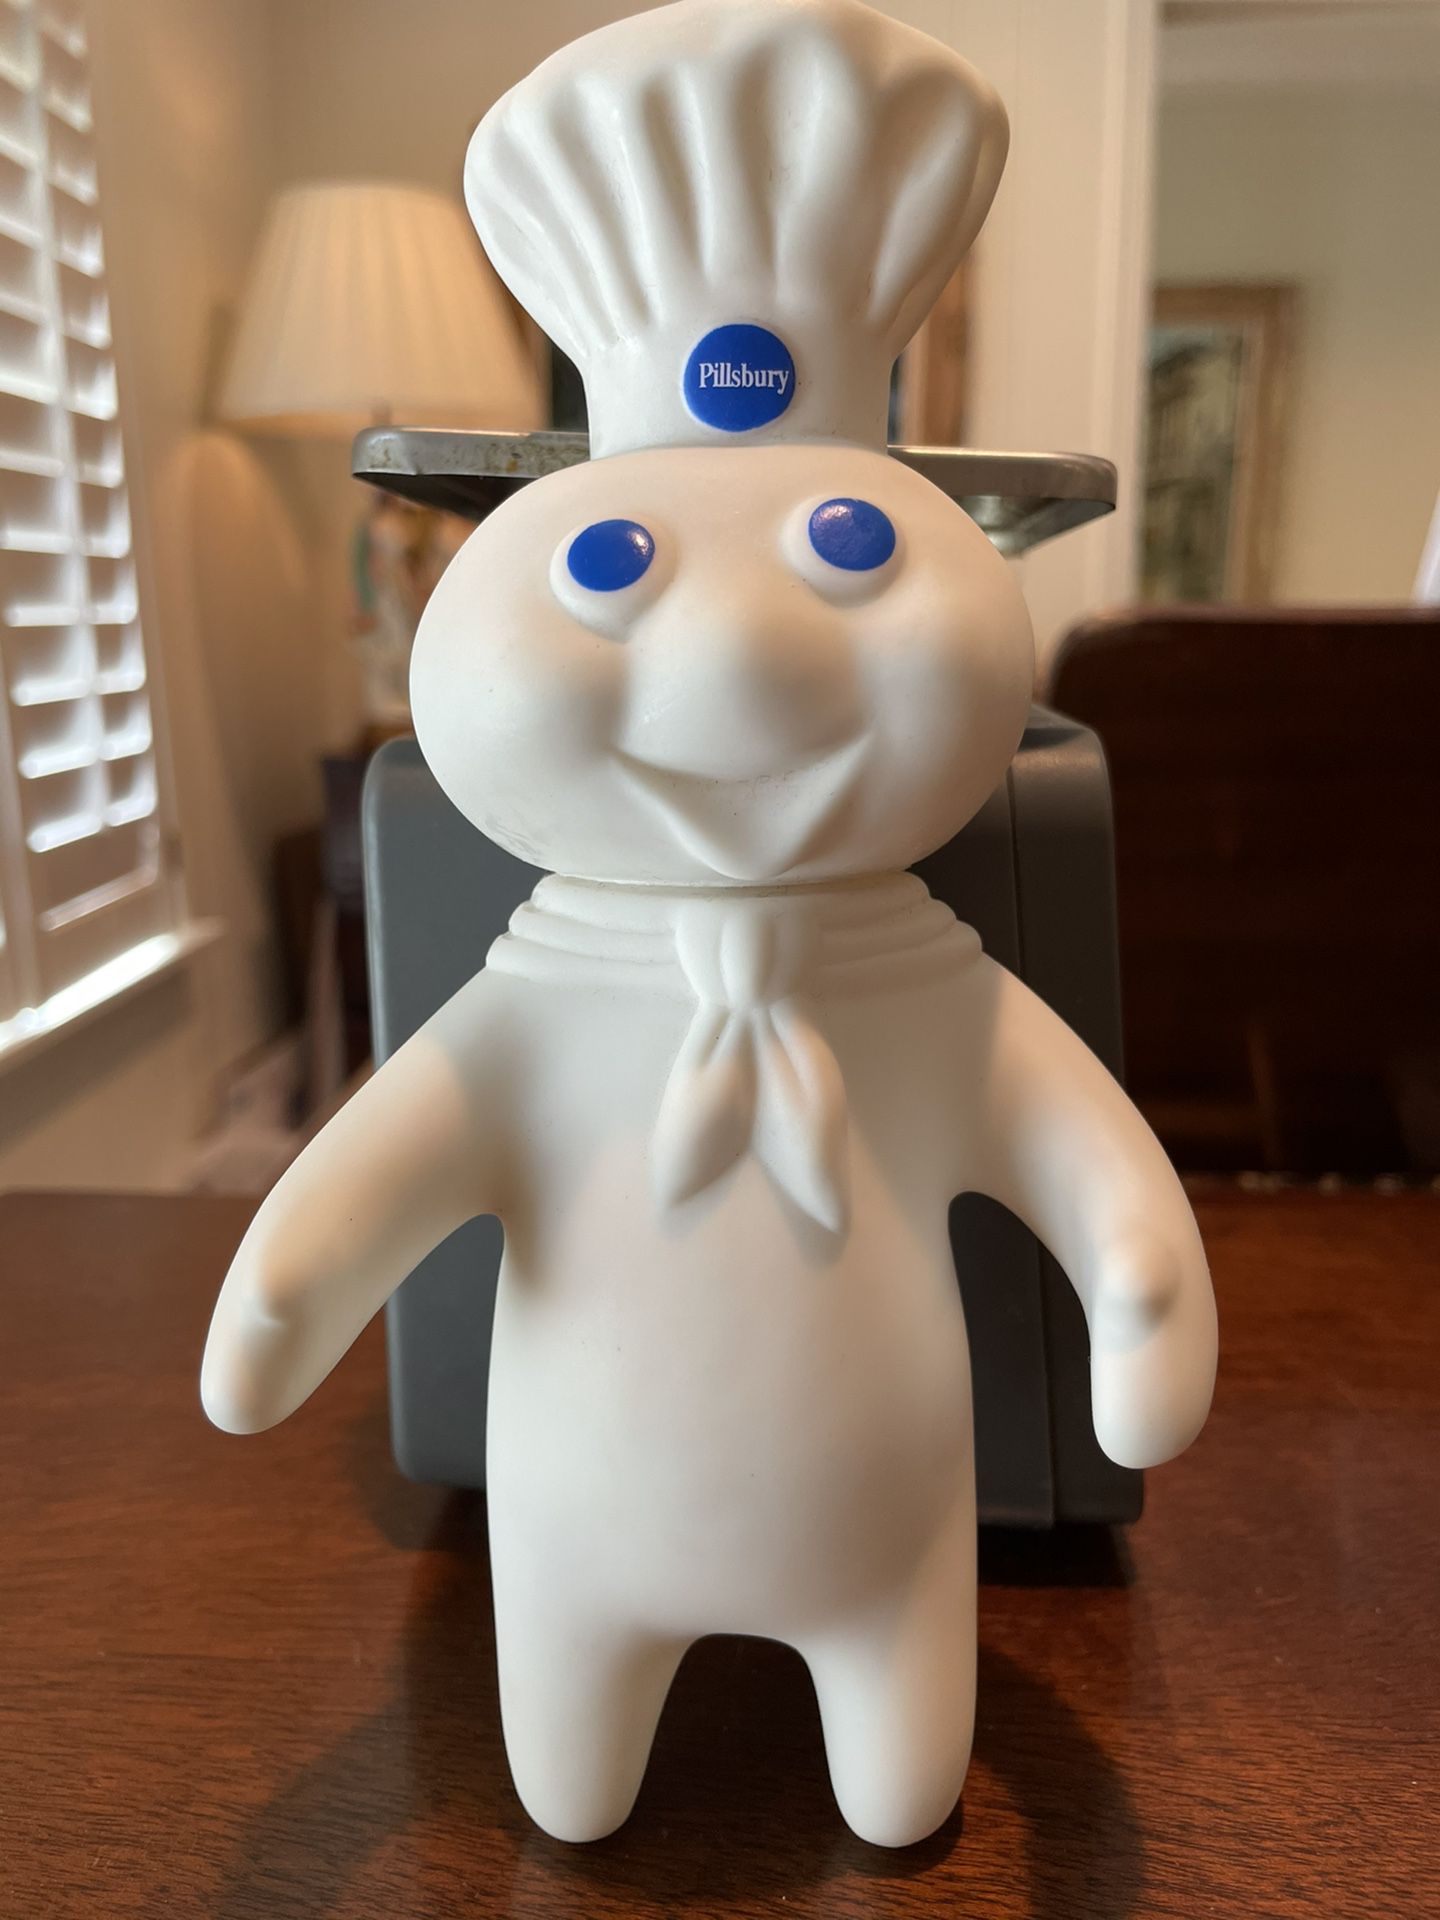 *As Is VTG Pillsbury Doughboy Figure PVC Doll Soft Rubber 1971 Poppin Fresh Toy-*As Is*. Condition is "Used" and shows signs of wear from age and play